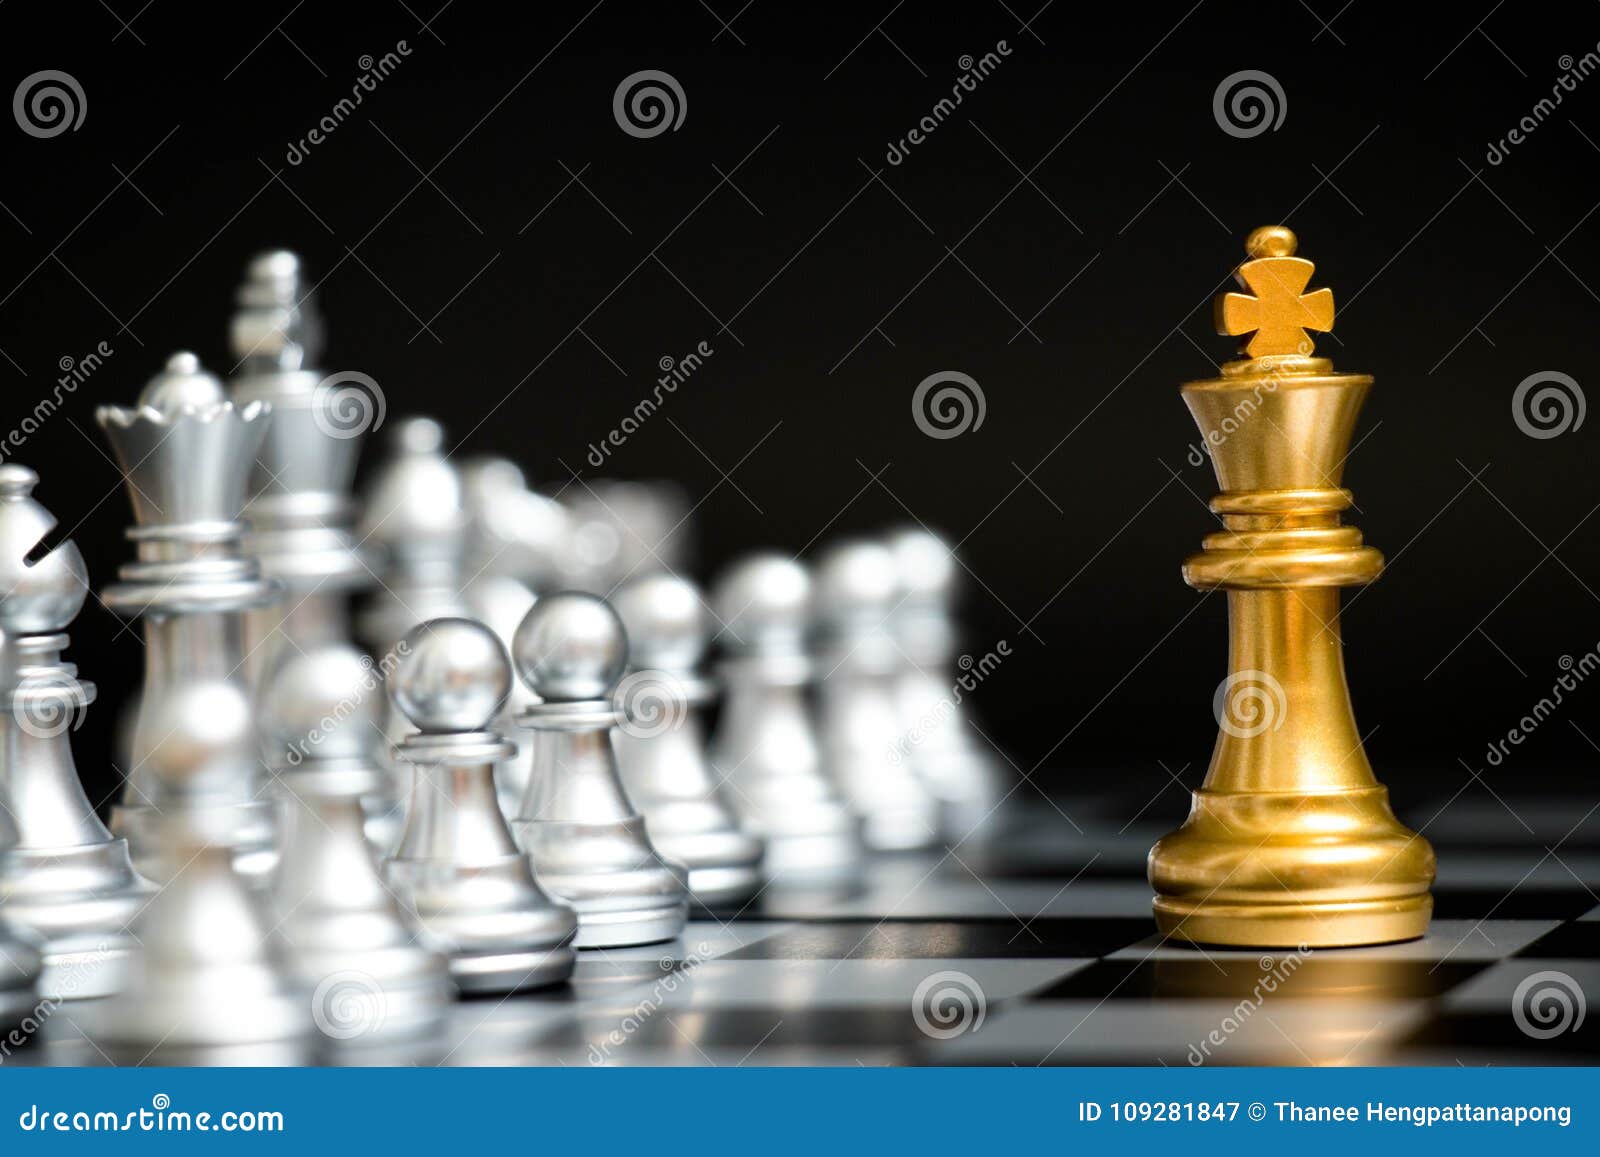 Gold King In Chess Game Face With The Another Silver Team Stock Image ...